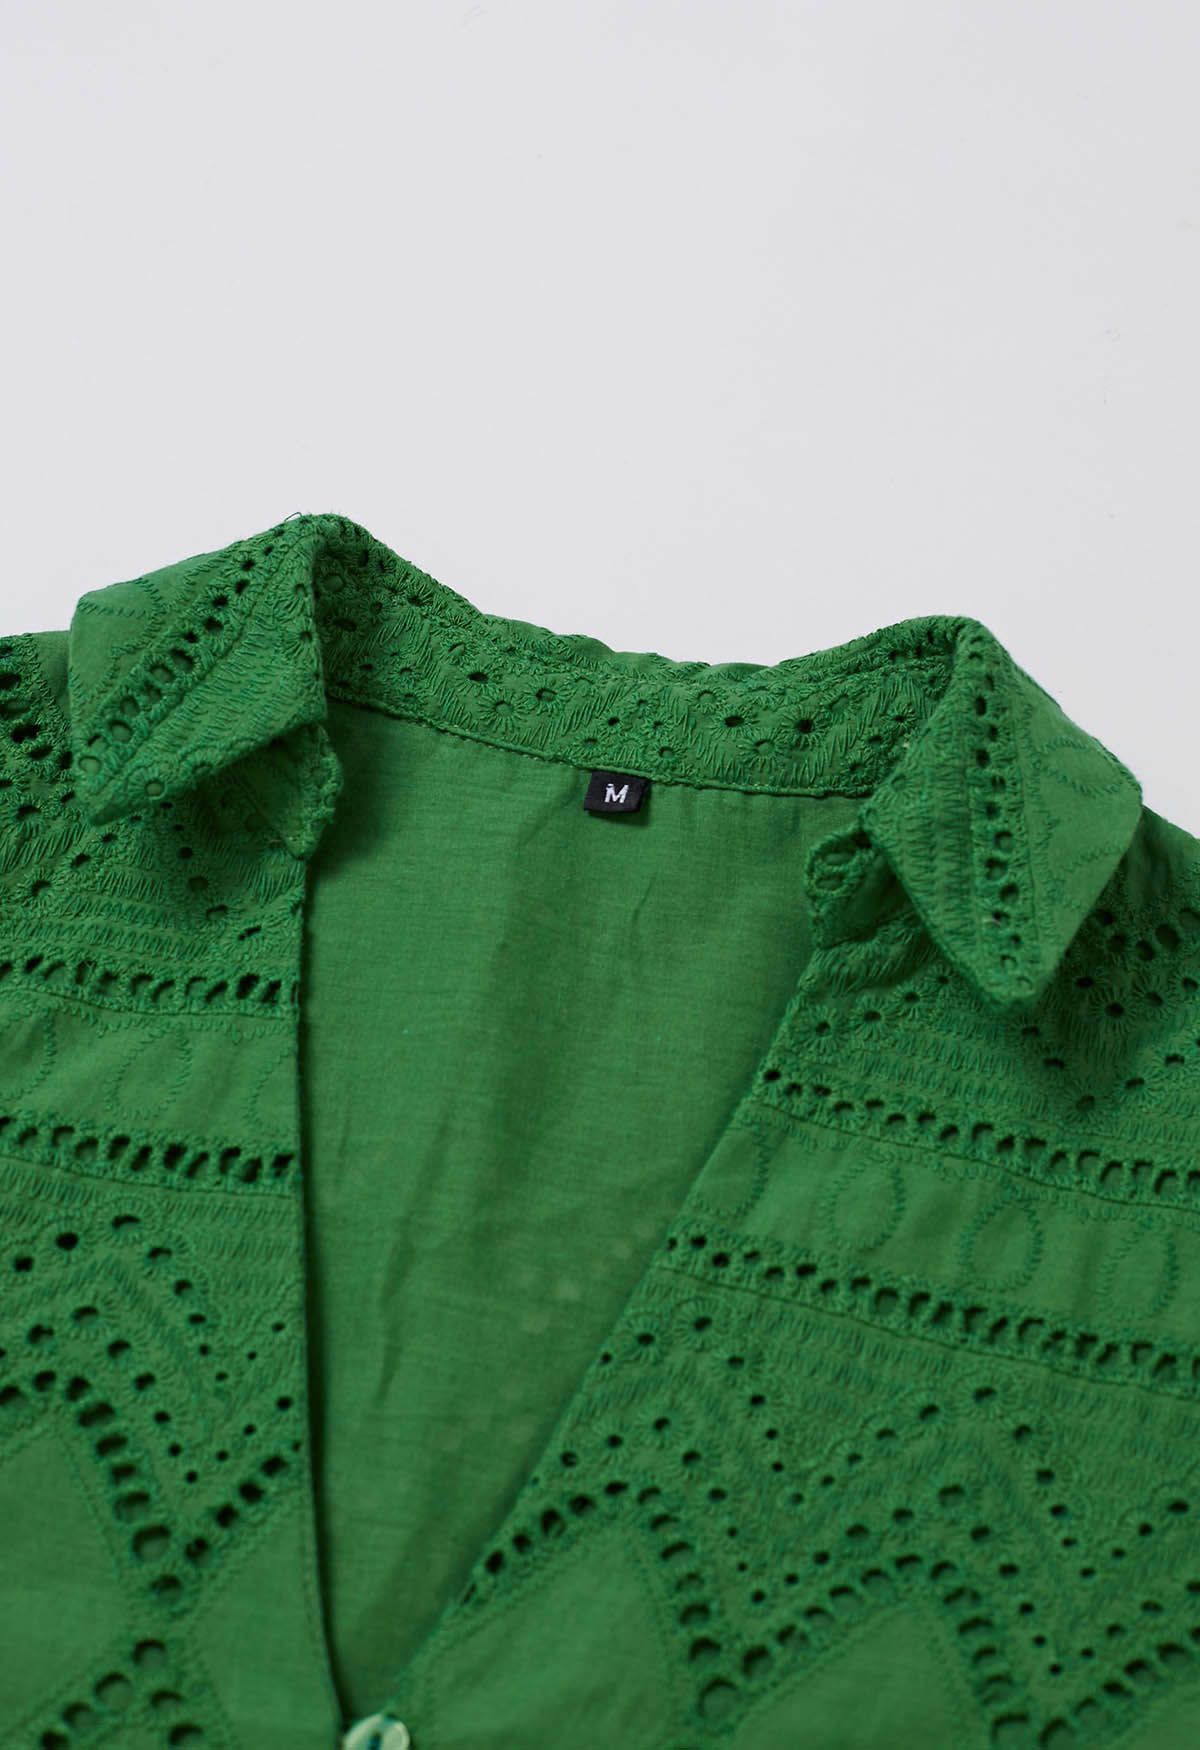 Greenery in Spring Embroidered Eyelet Frilling Dress